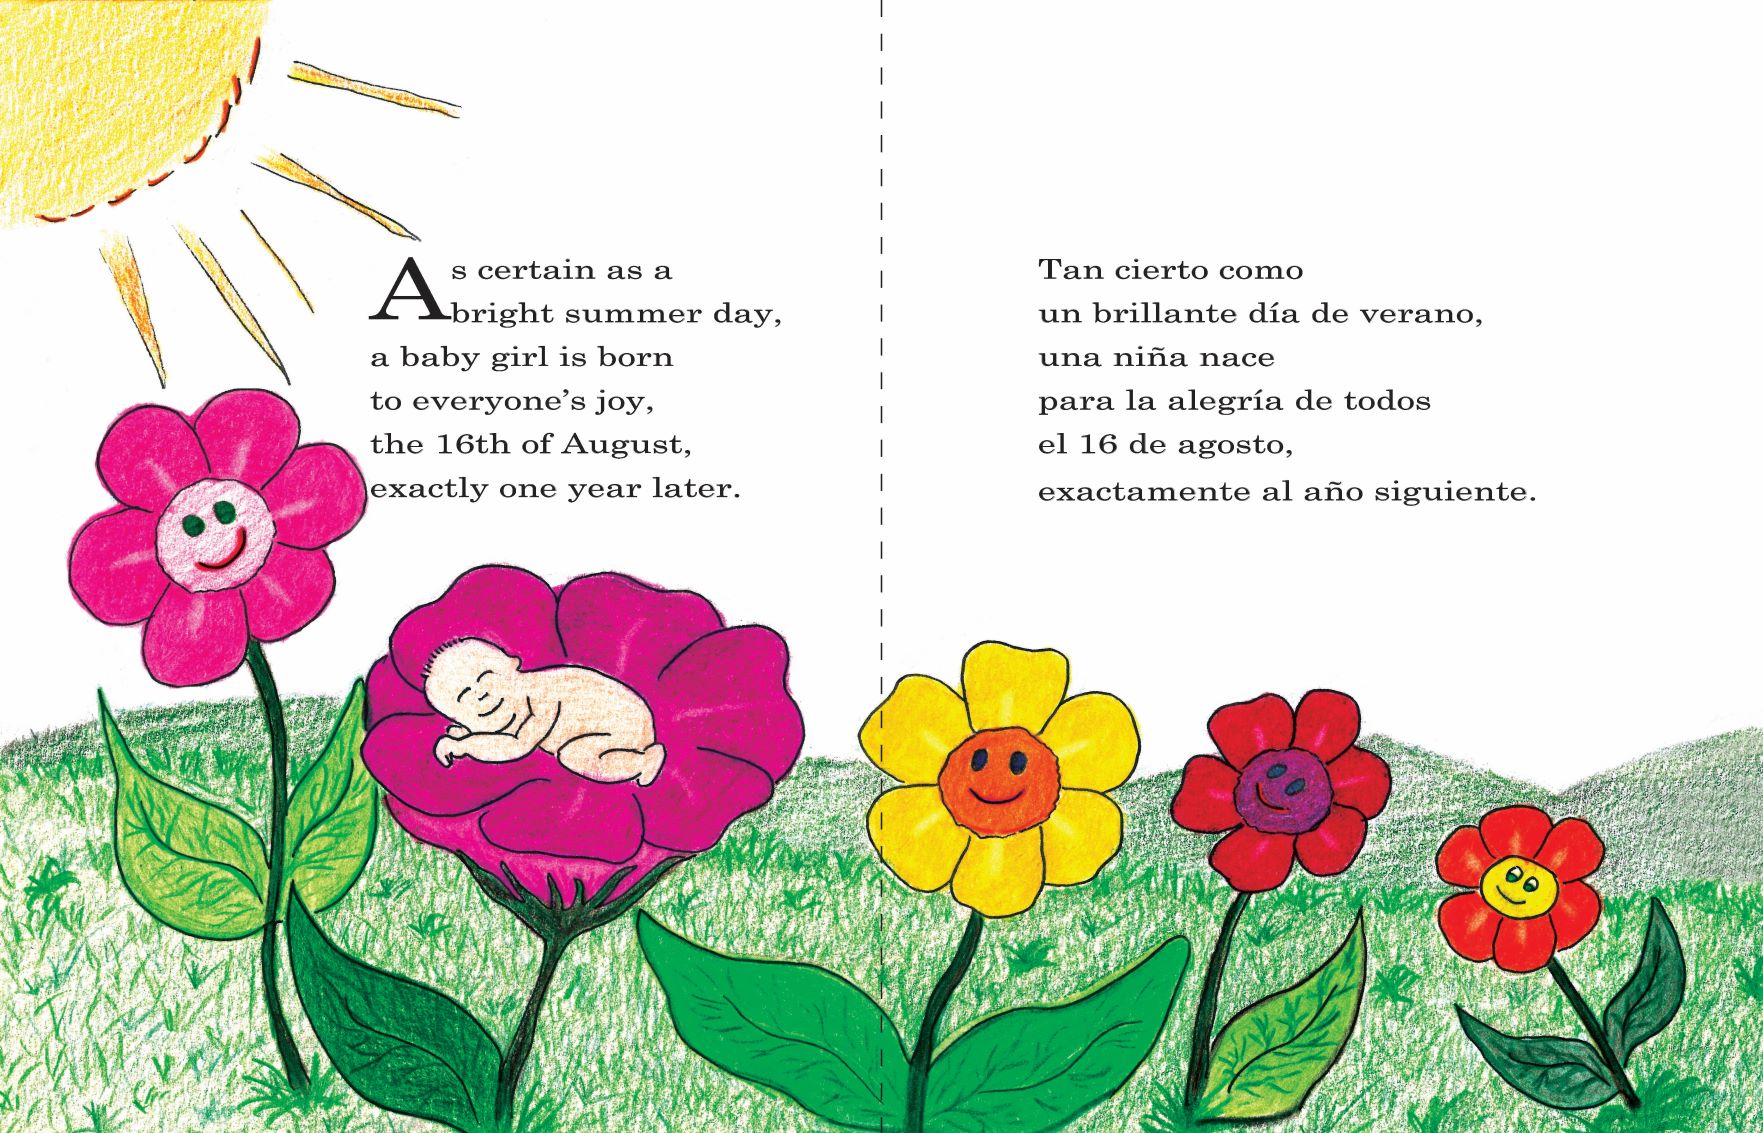 An Angel from Above - Un ángel desde arriba Bilingual Children's Book preview page